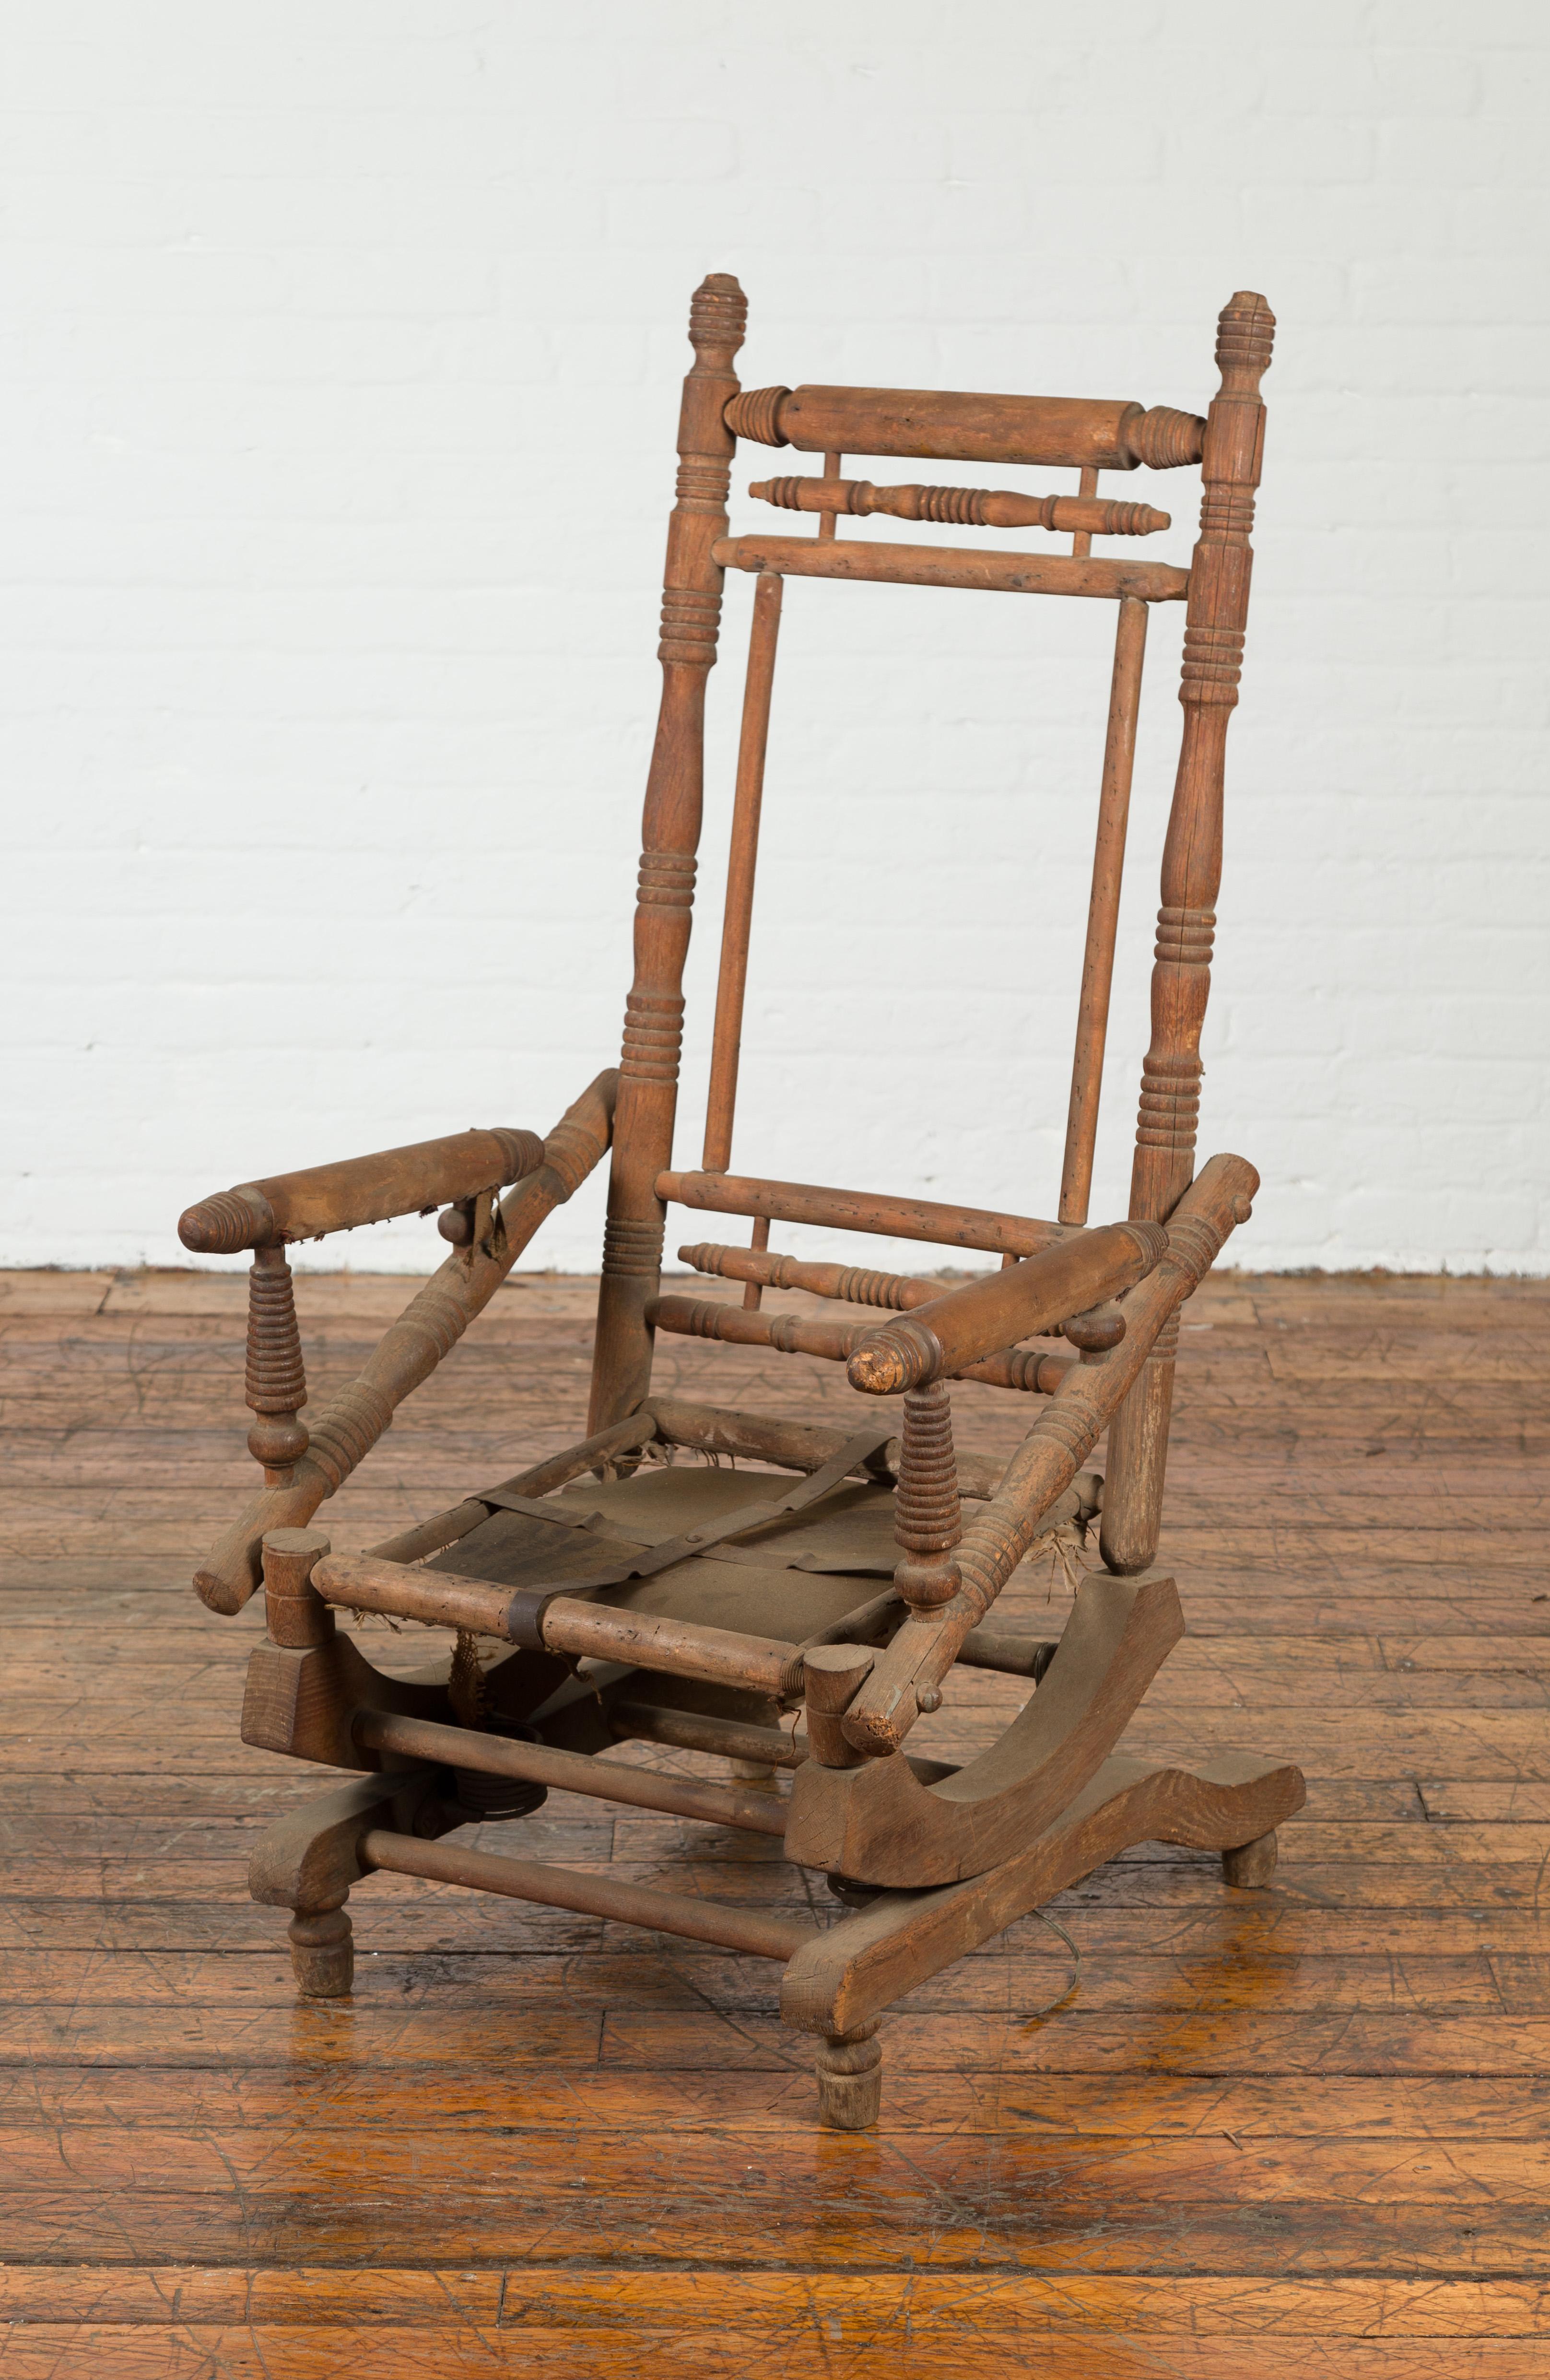 A rustic antique Indian rocking chair from the 19th century, with metal accents and nicely distressed appearance. Created in India during the 19th century, this rocking chair charms us with its highly distressed appearance and great age. Showcasing